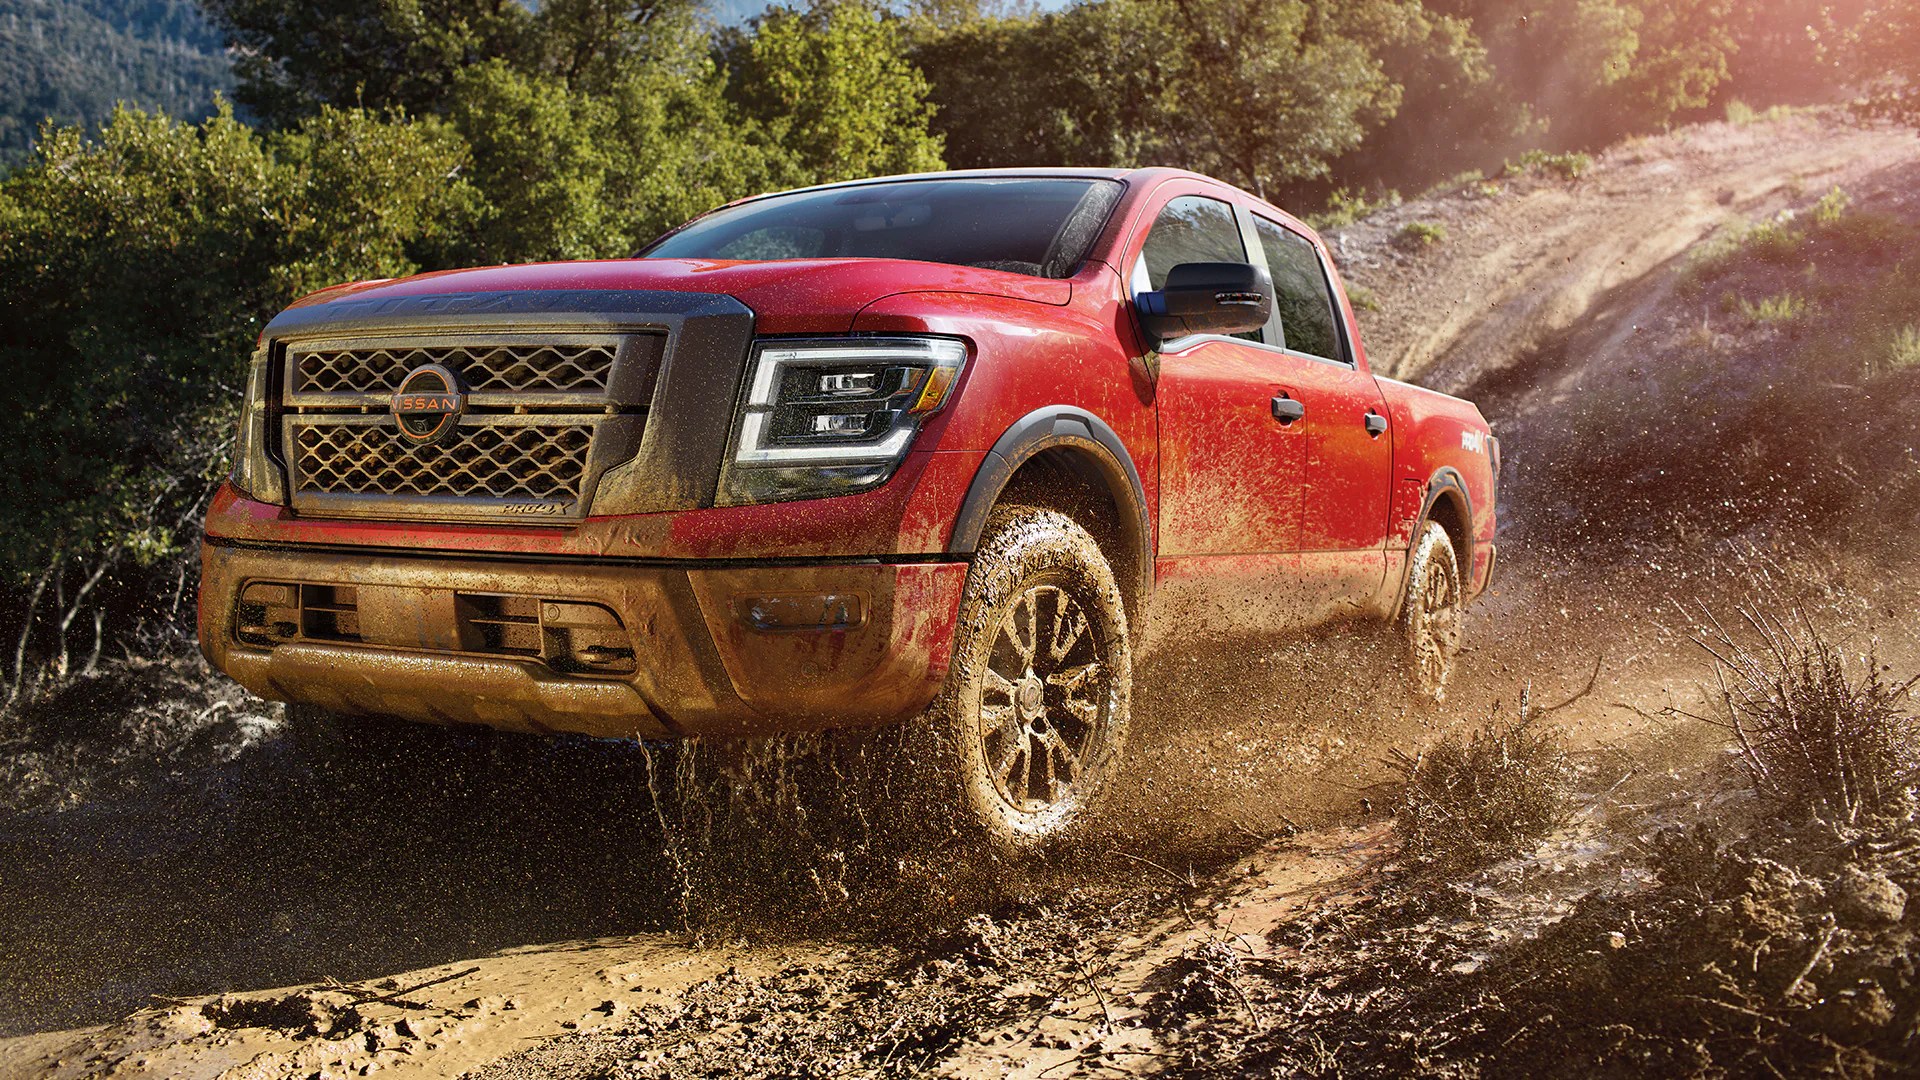 Nissan's full-size truck, the 2023 Titan shows off its capability on a trail.